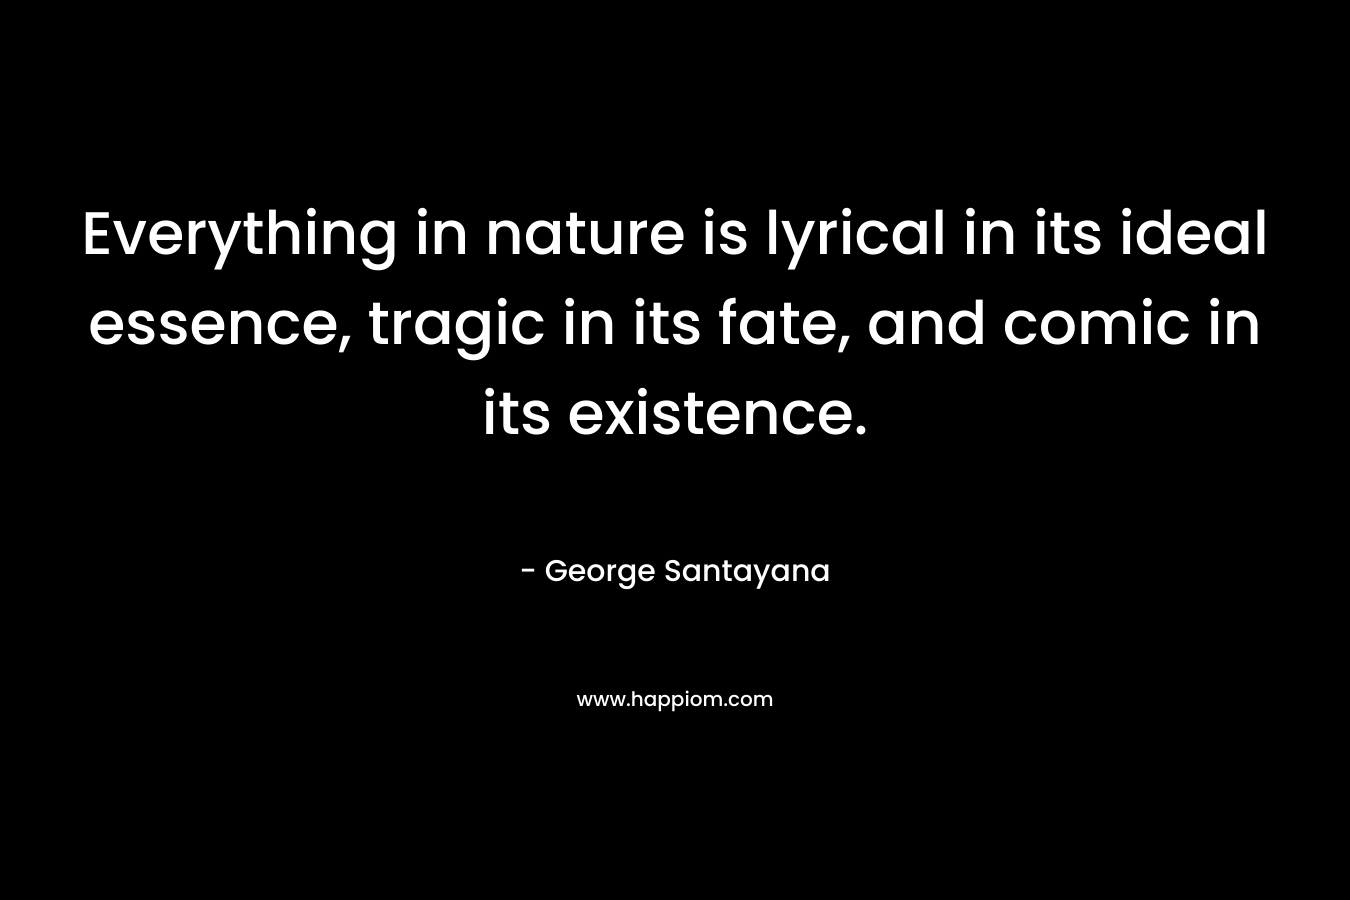 Everything in nature is lyrical in its ideal essence, tragic in its fate, and comic in its existence.